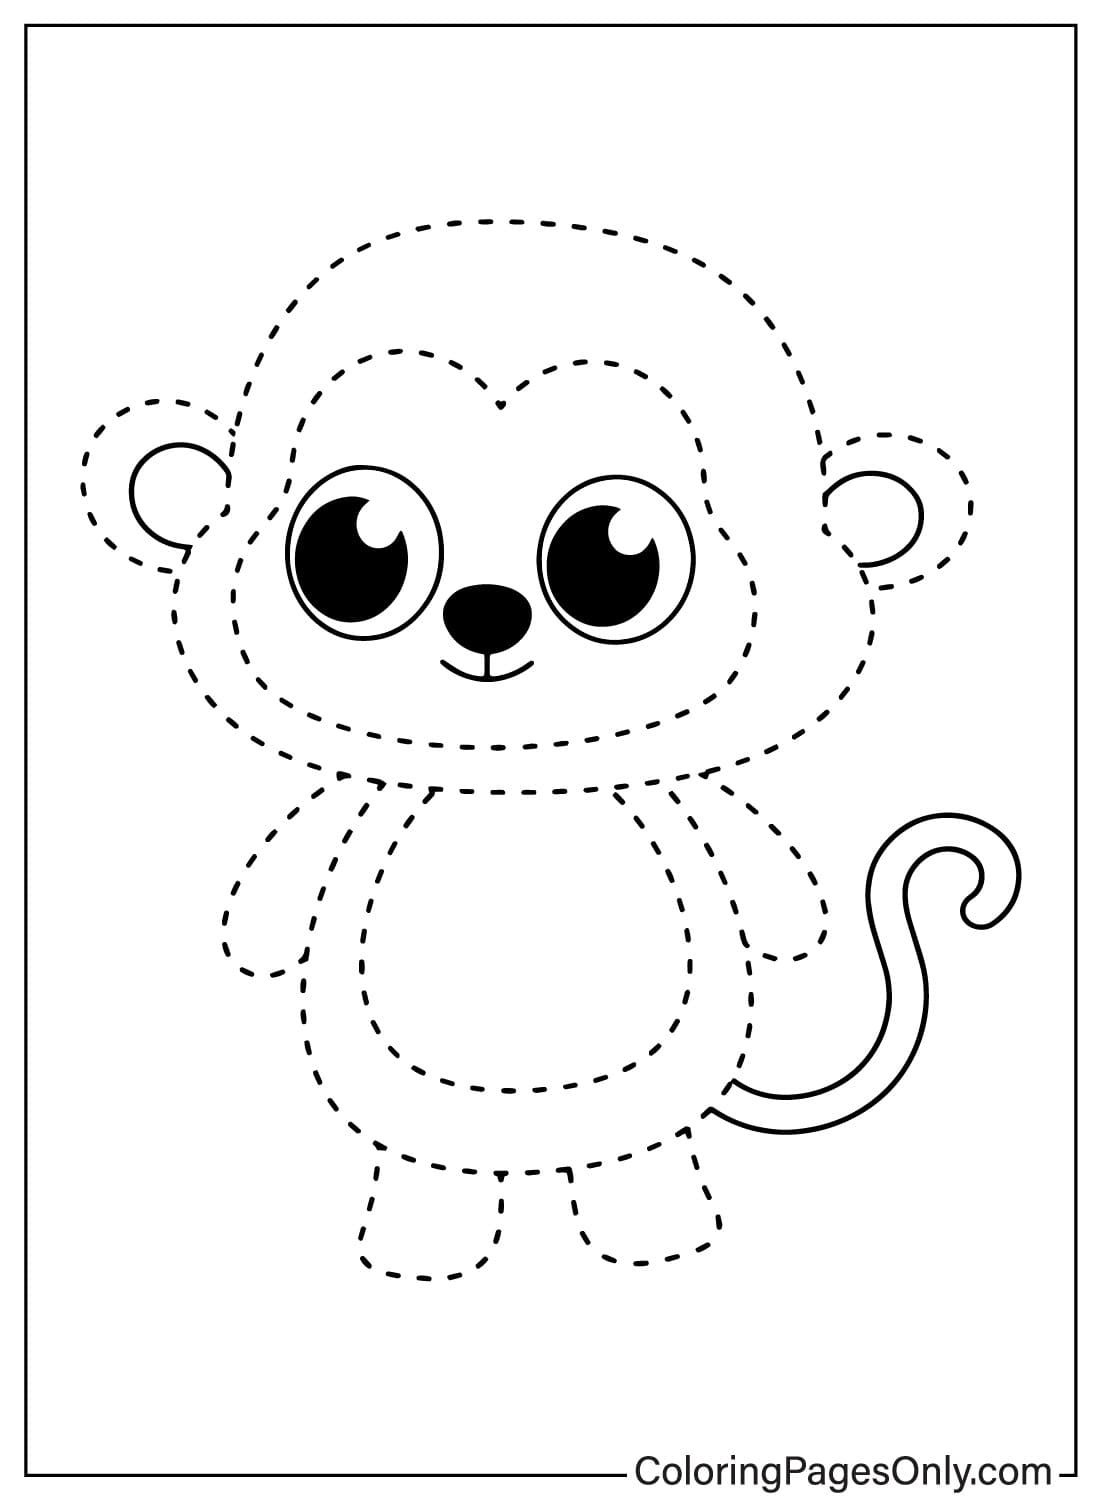 Tracing Monkey Coloring Page from Tracing